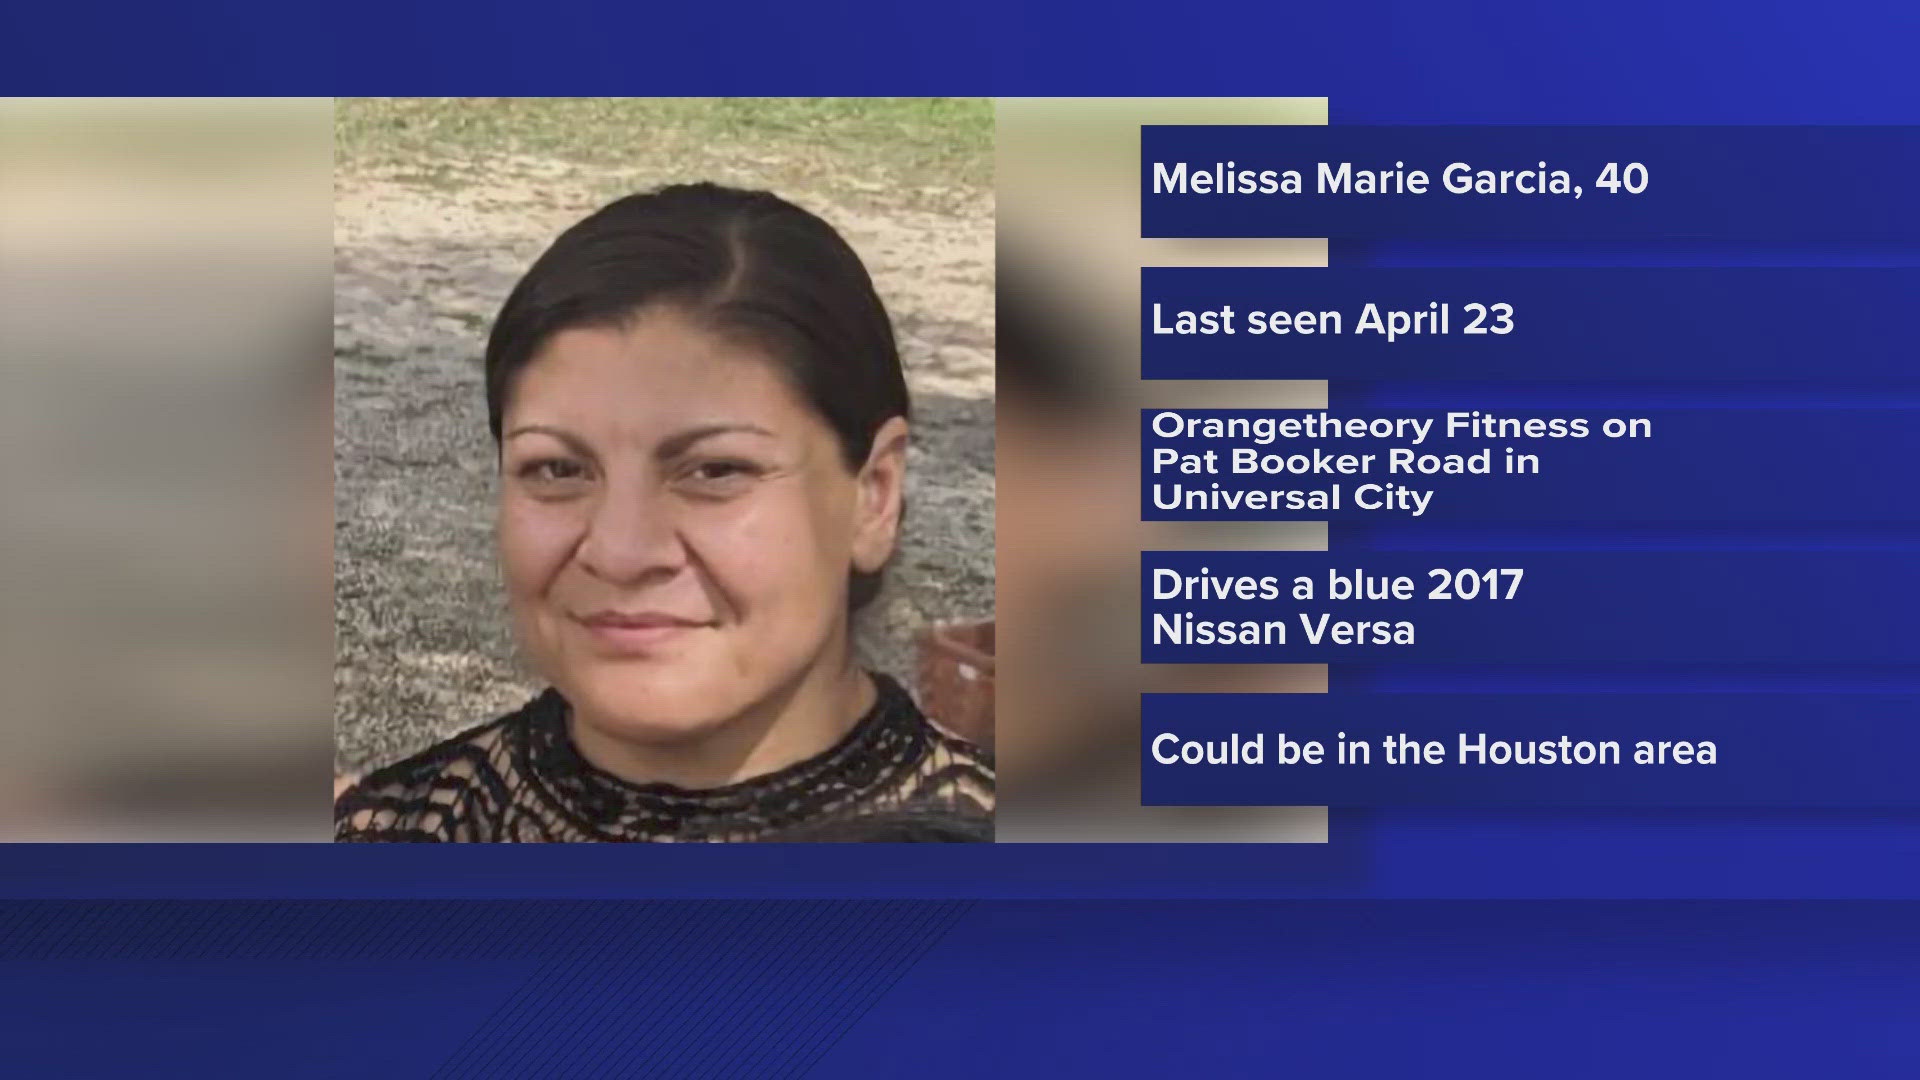 Deputies say Melissa Marie Garcia, 40, was last seen April 23rd at Orange Theory Fitness in Universal City.